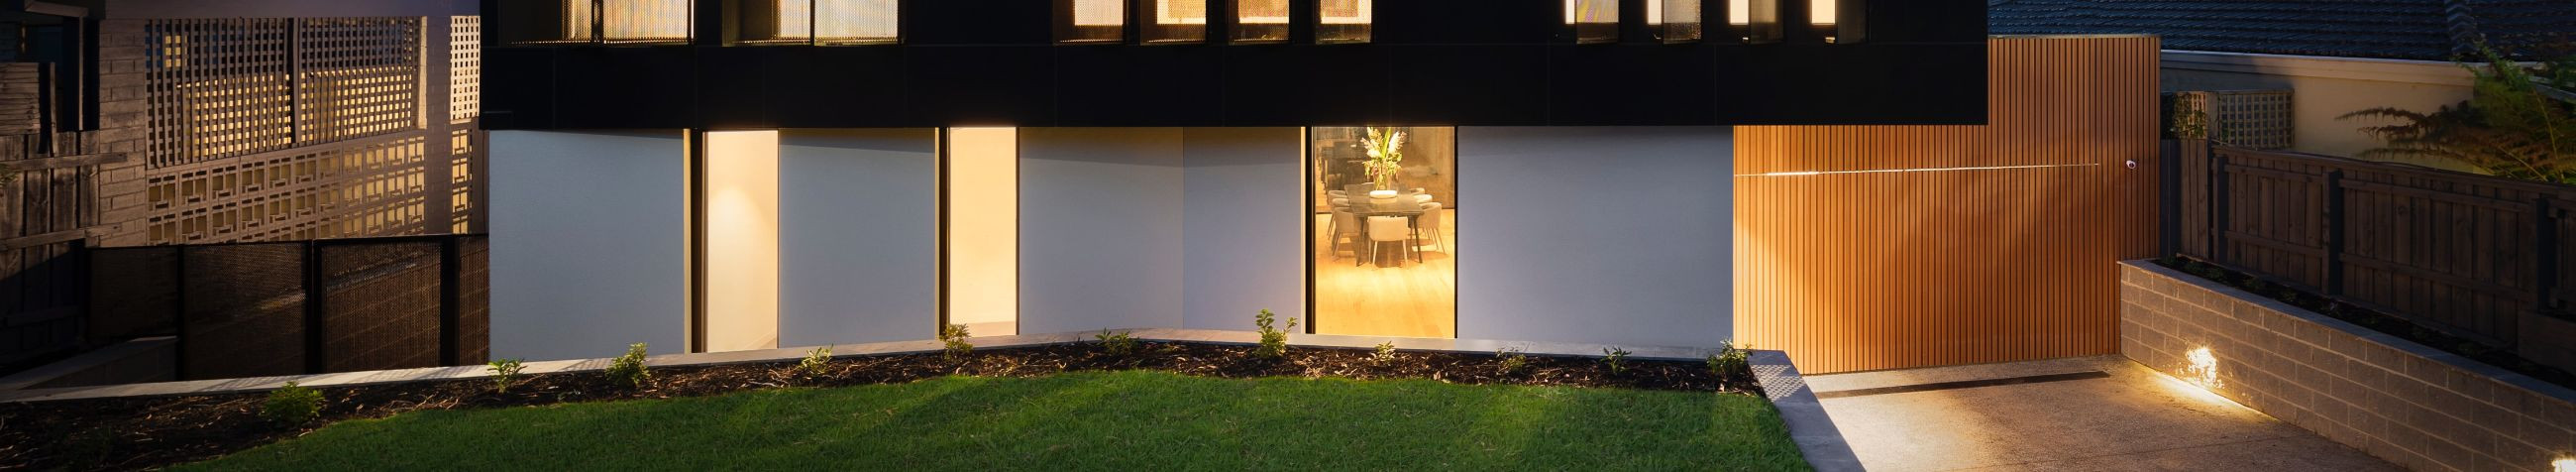 We offer an extensive selection of outdoor and indoor luminaires, enhancing spaces with light and design.